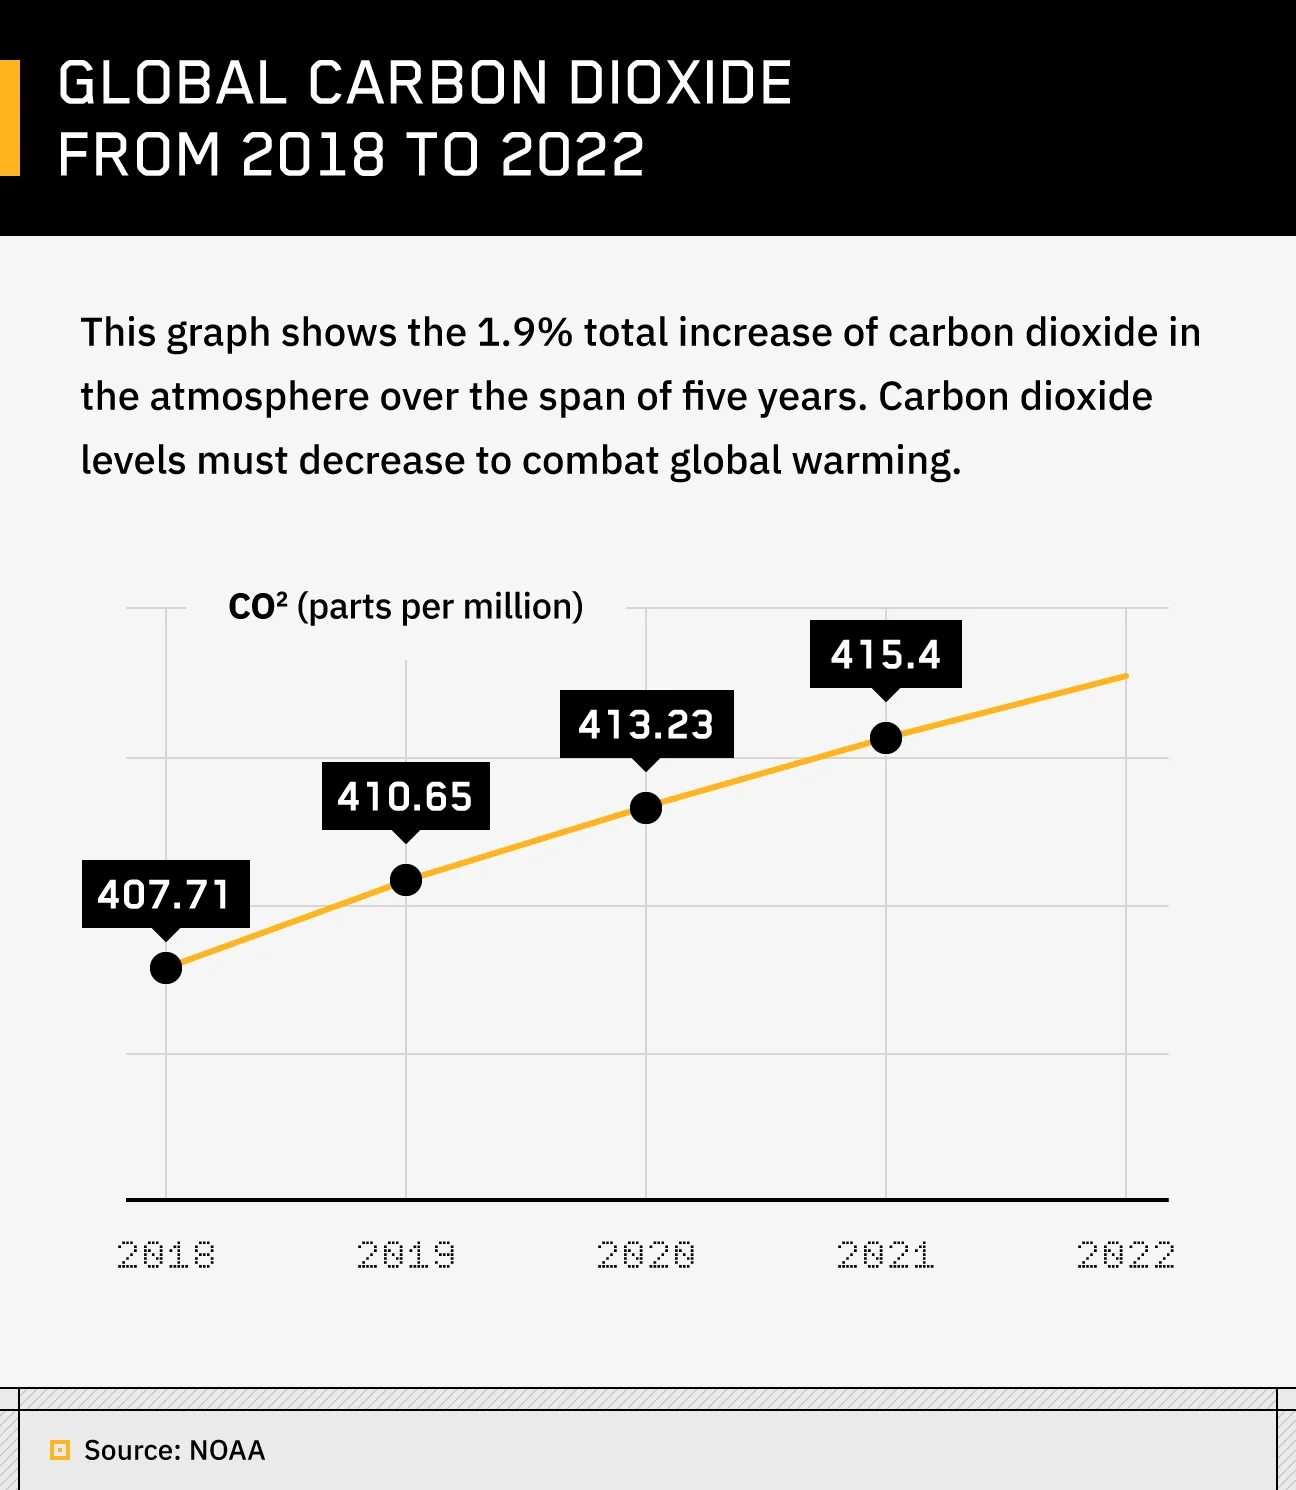 line graph illustrating global carbon dioxide increase from 2018 to 2022 using NOAA data